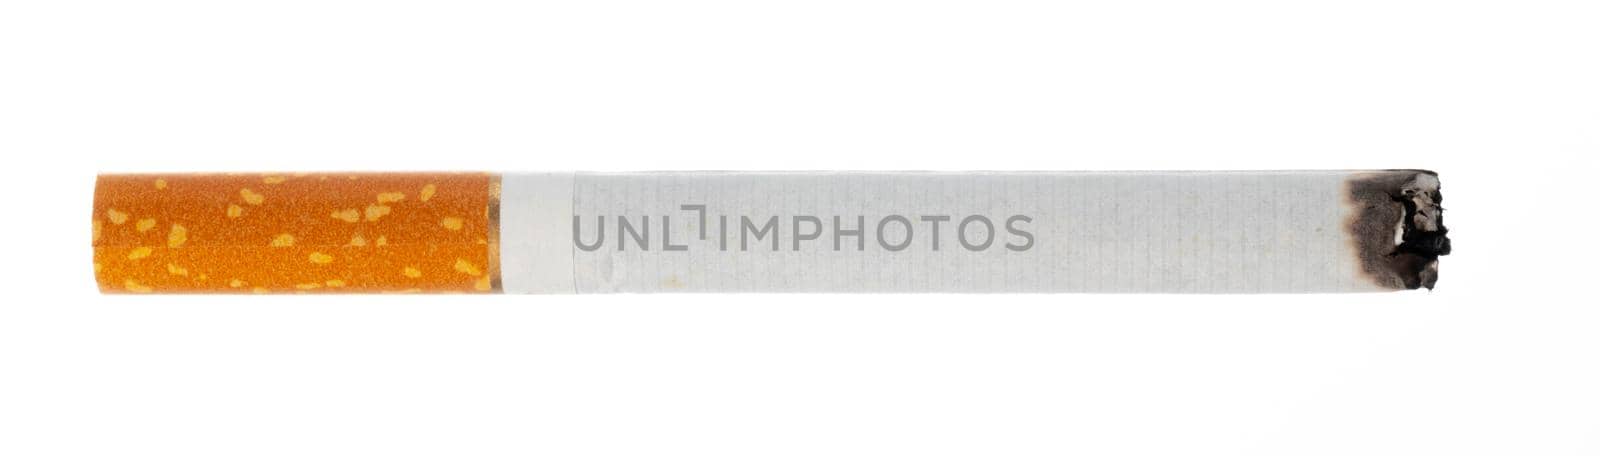 Lit cigarette isolated on white background close up by Fabrikasimf